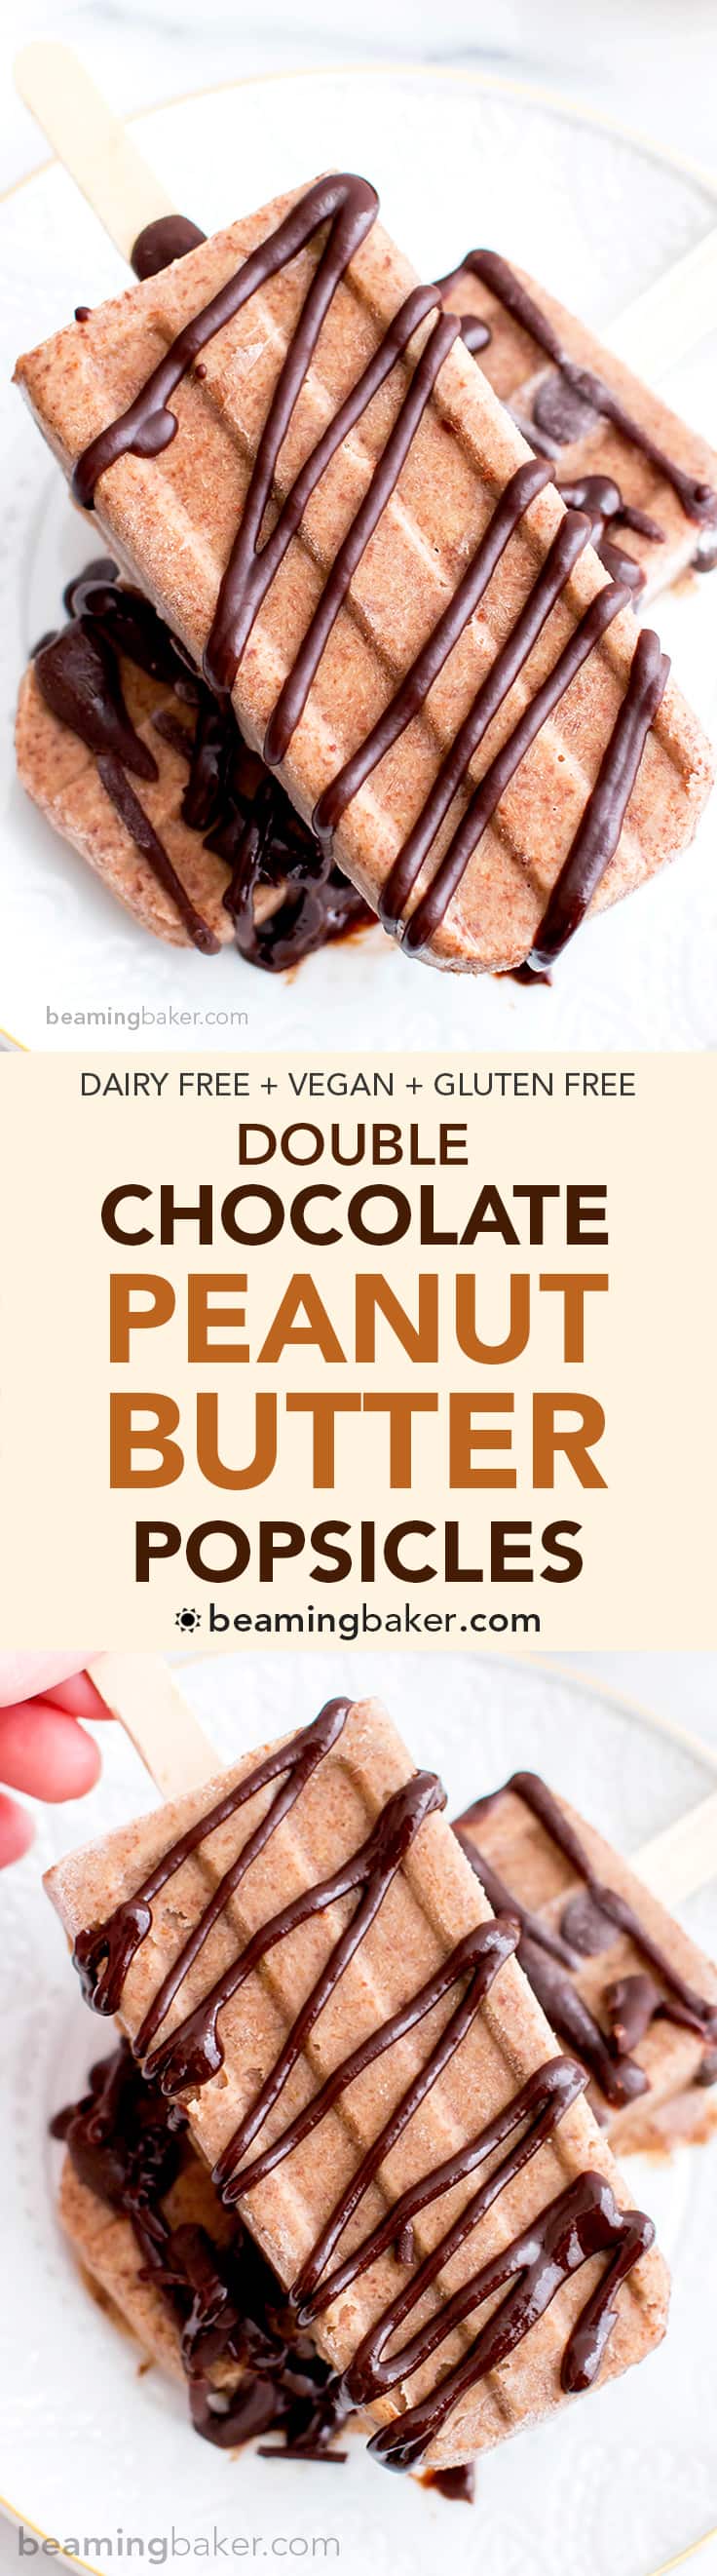 Double Chocolate Peanut Butter Banana Popsicles (V+GF): a 6 ingredient plant-based recipe for rich, creamy chocolate-drizzled peanut butter banana popsicles. #Vegan #GlutenFree #DairyFree | BeamingBaker.com